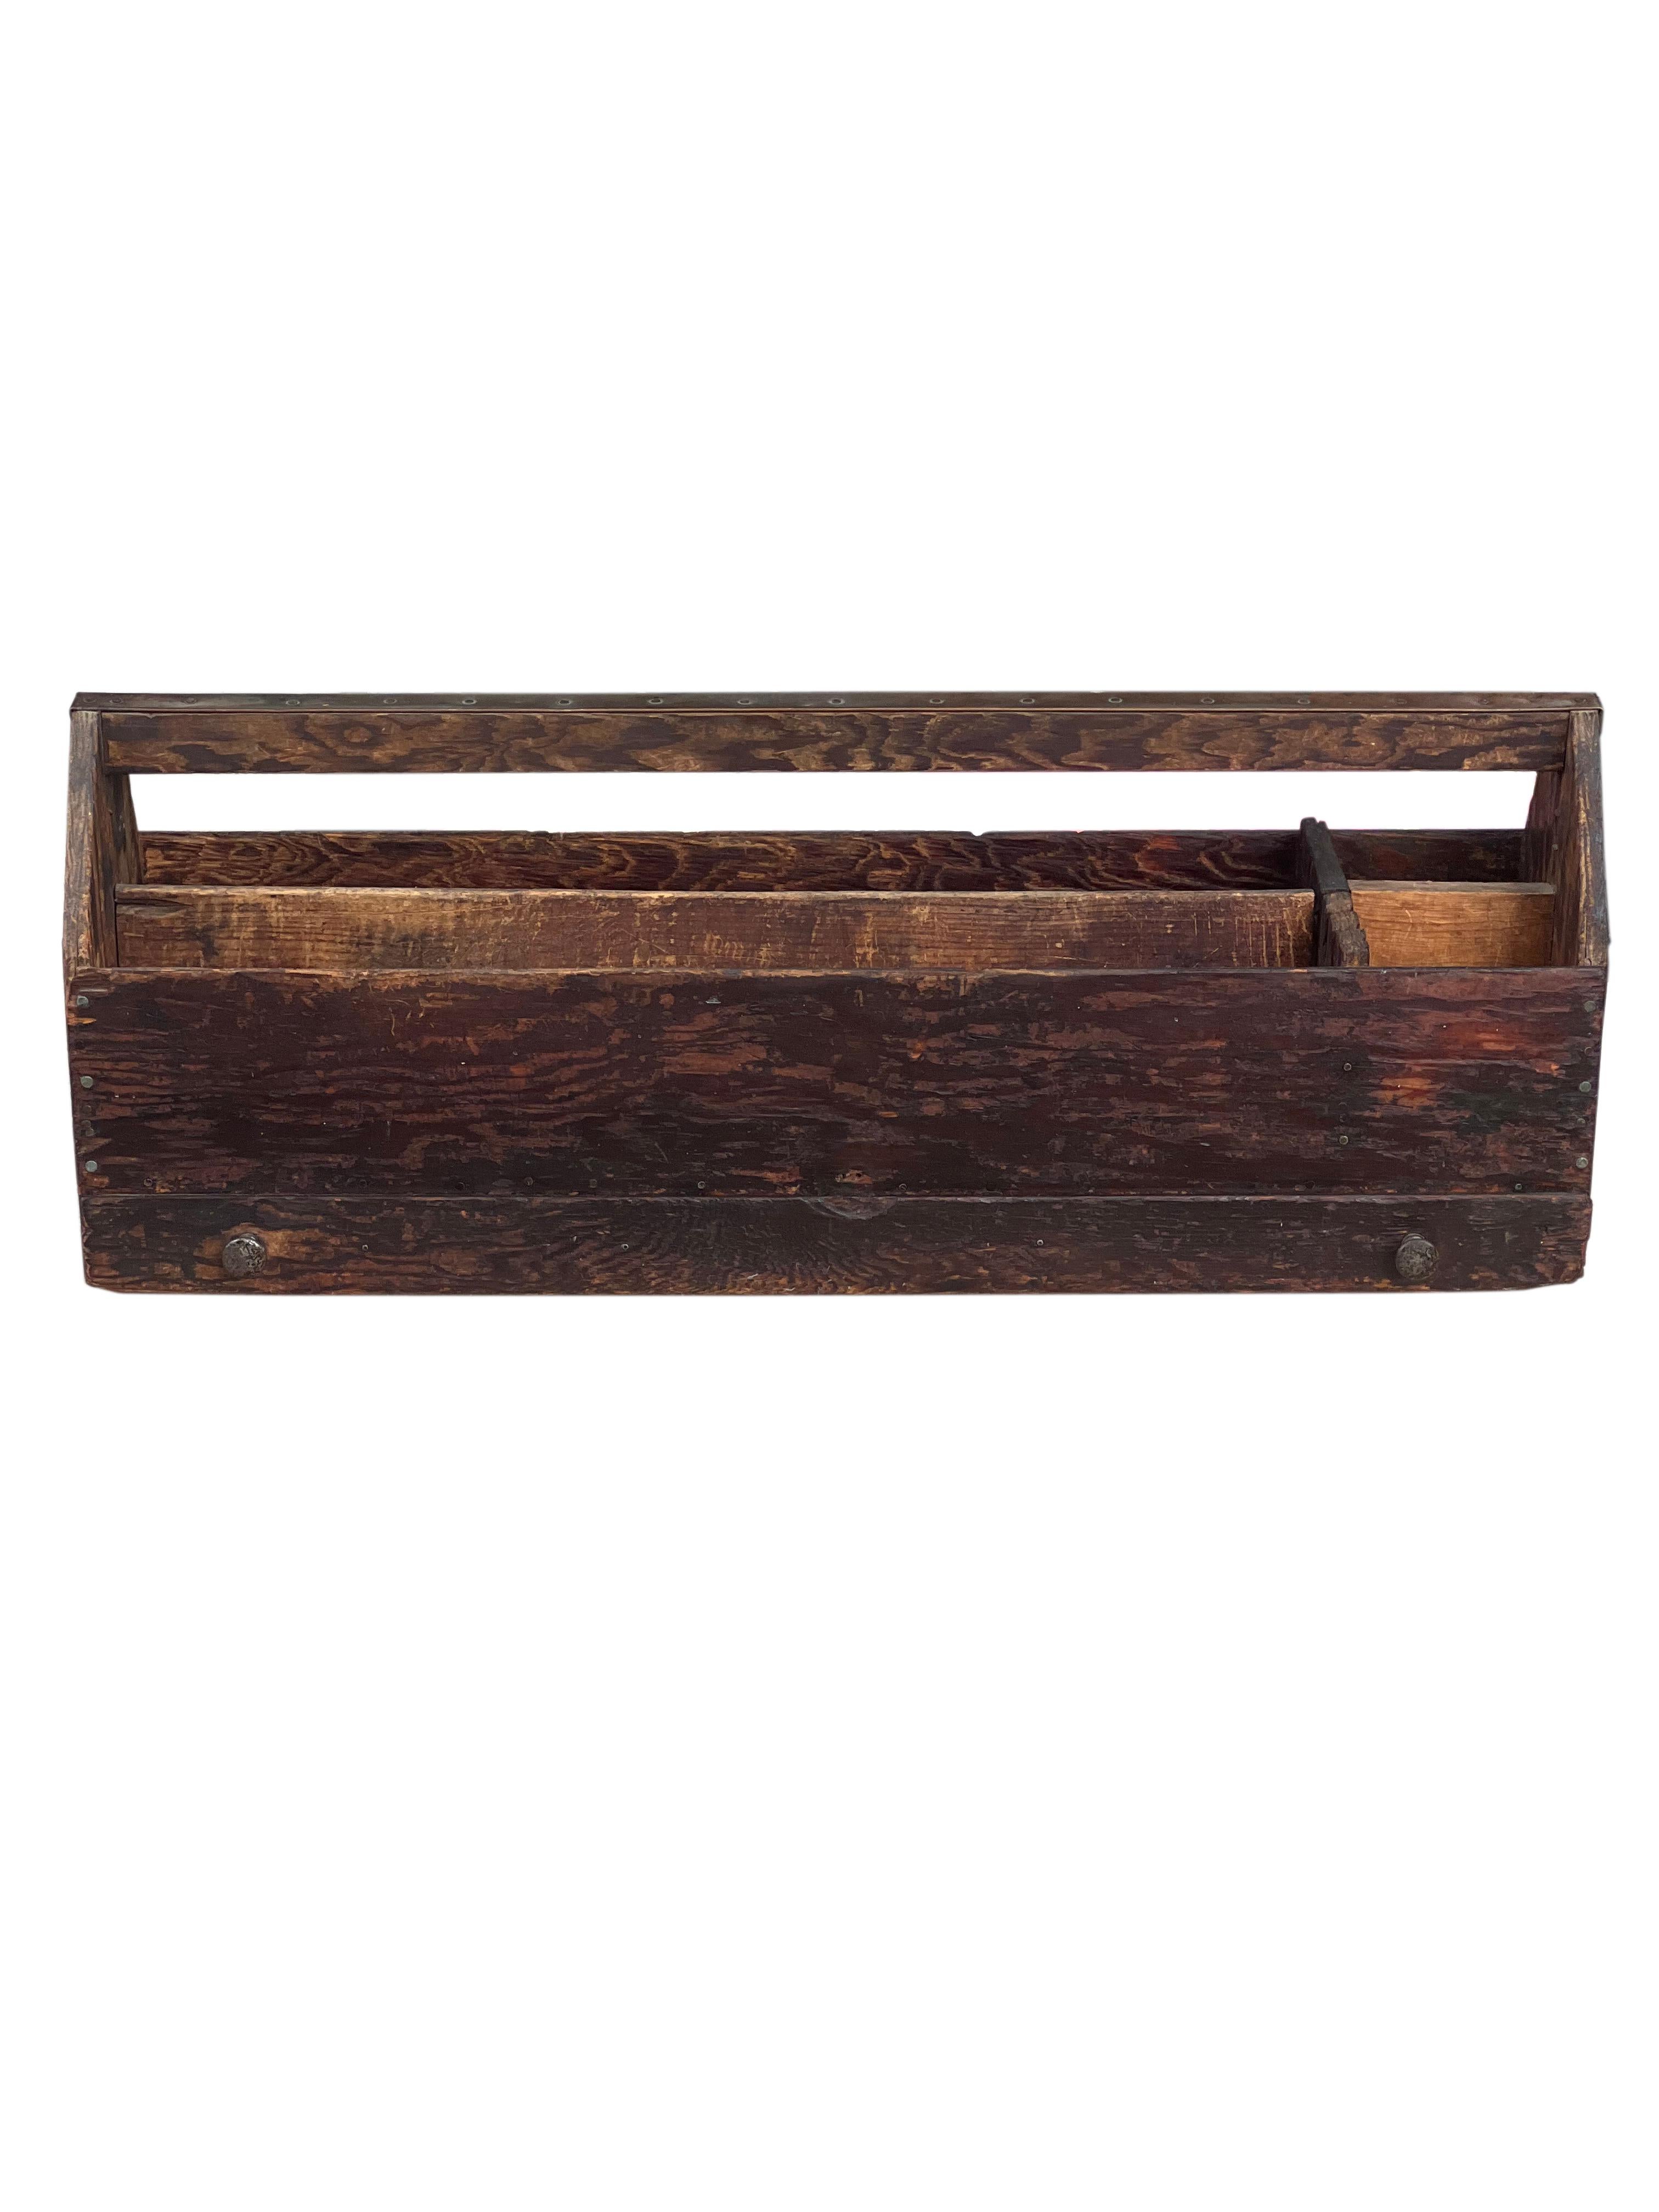 wooden tool caddy